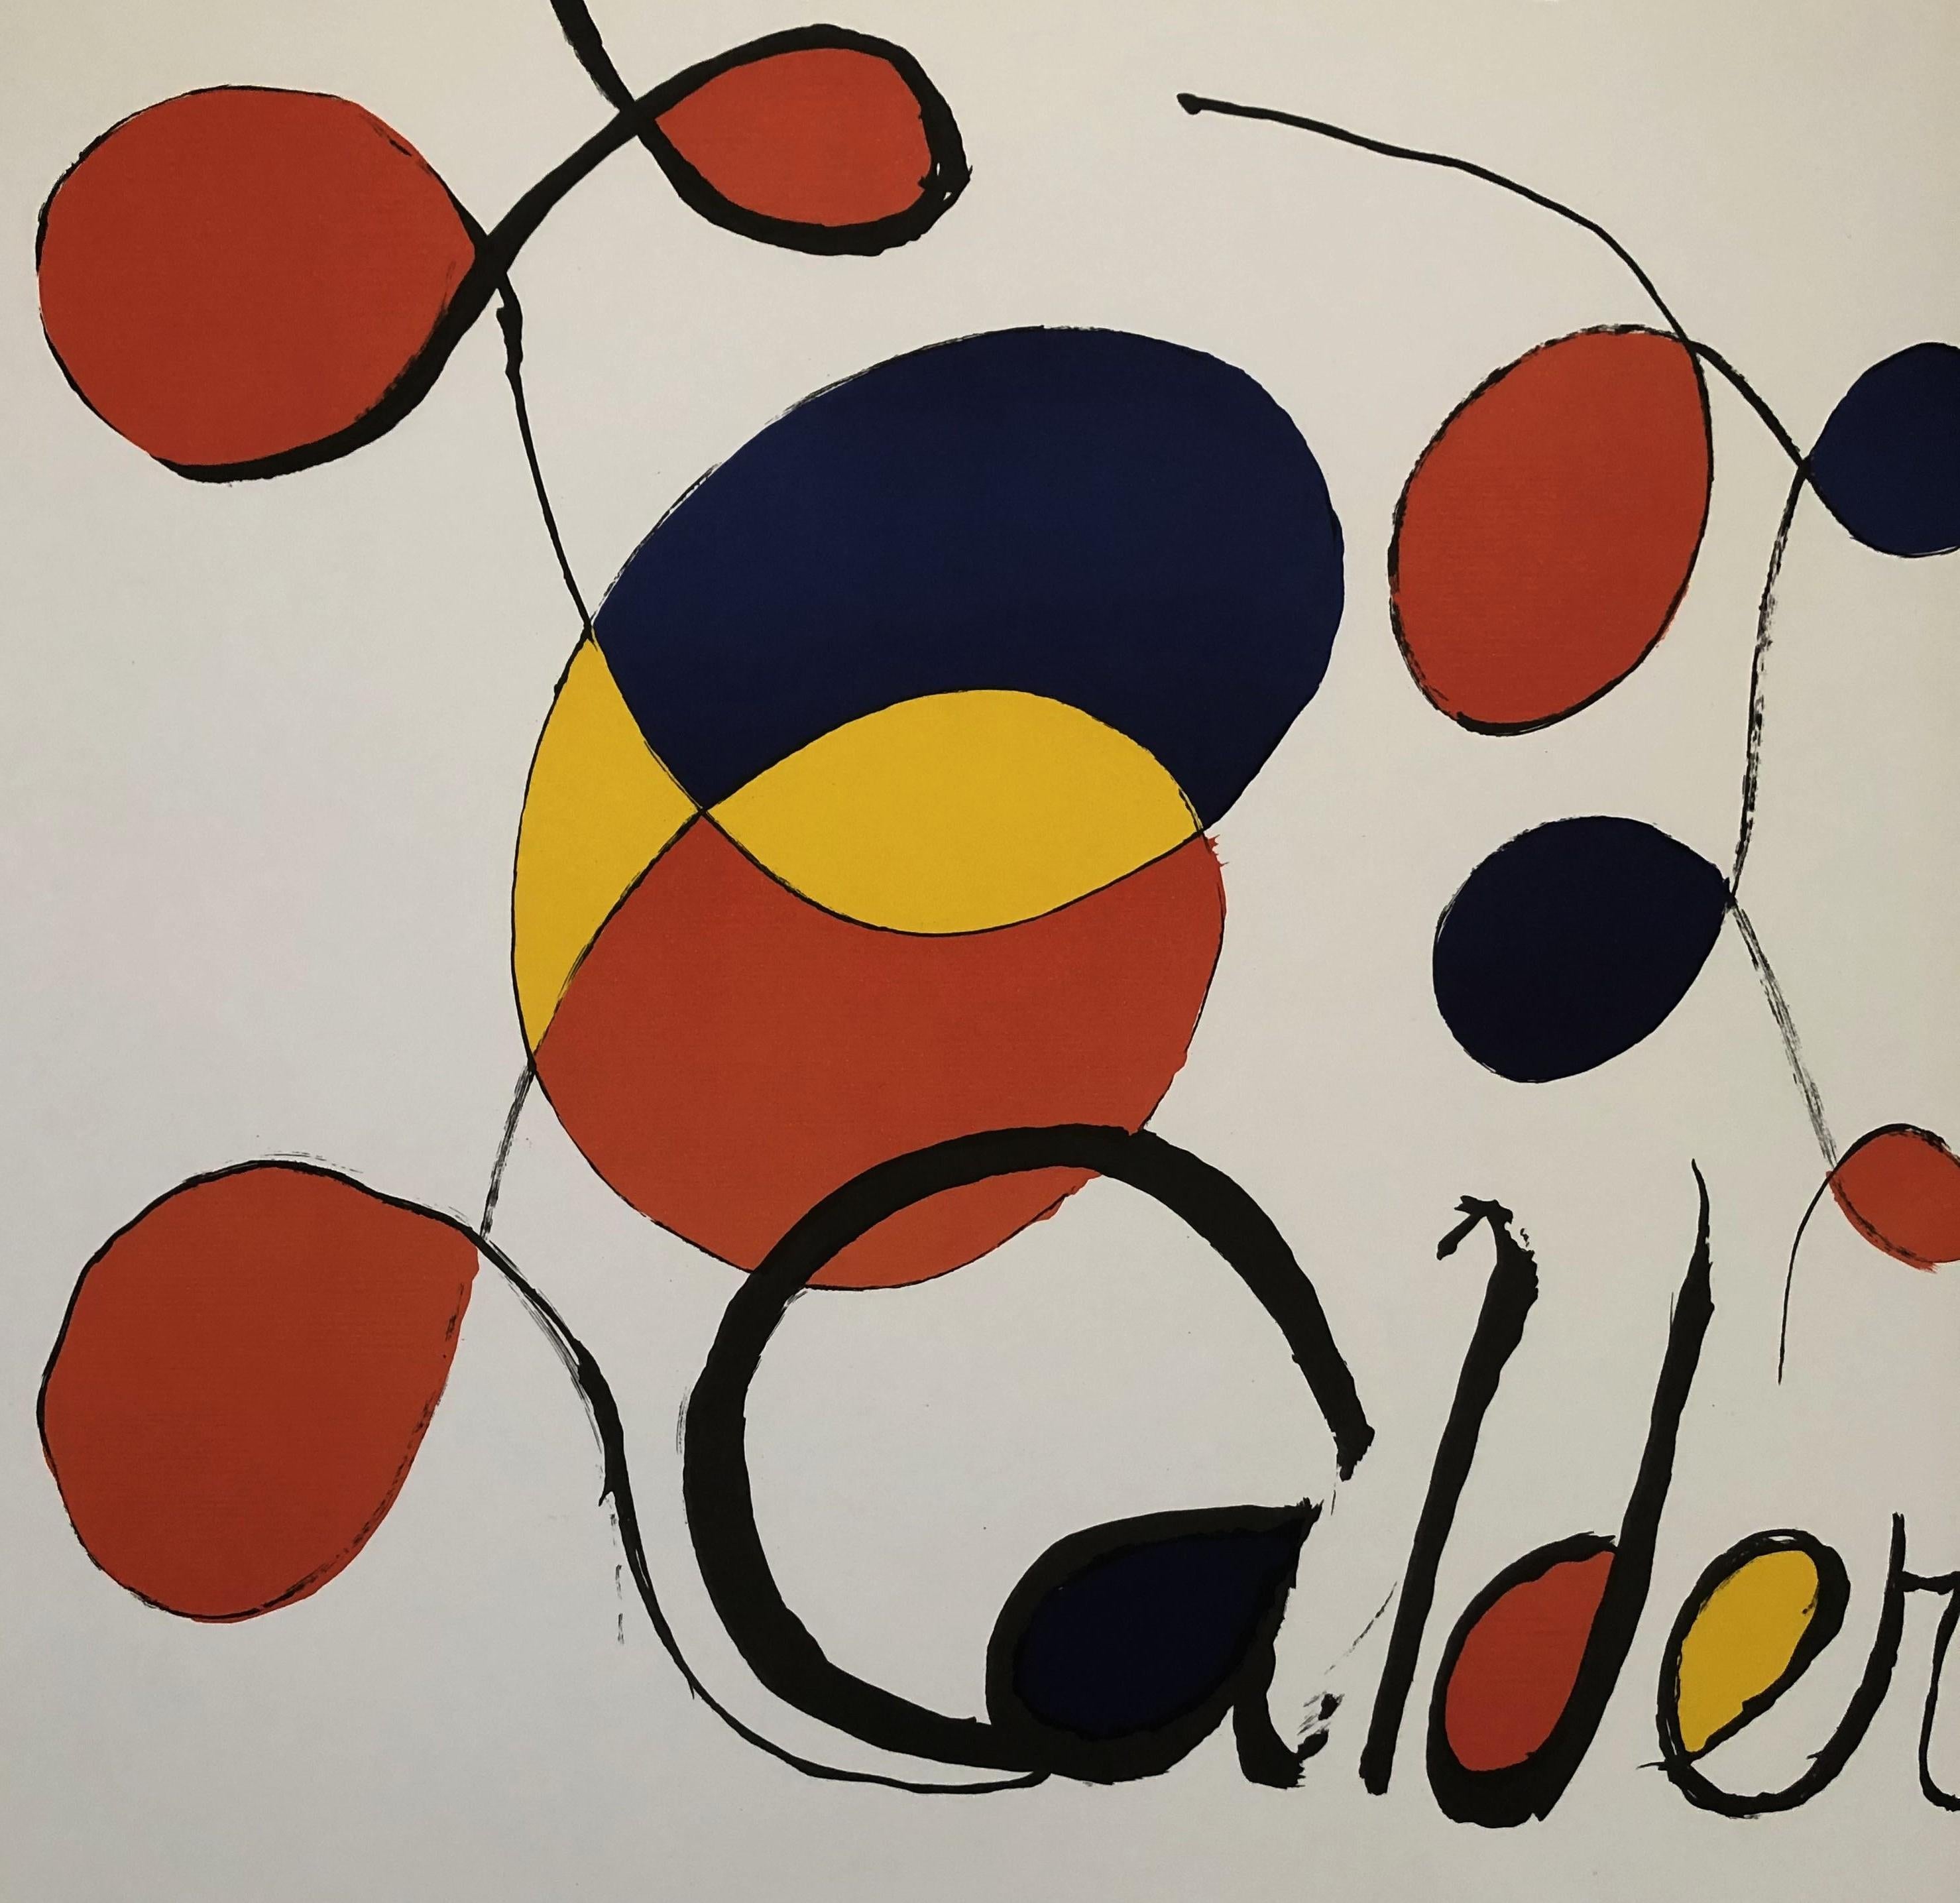 Alexander CALDER
Abstract Composition, 1971

Original vintage lithograph poster (Arte / Maeght workshop)
Printed signature in the plate
On thick paper 89 x 59 cm (c. 35 x 23,2 in)

INFORMATION : Poster created by Calder for his exhibition in